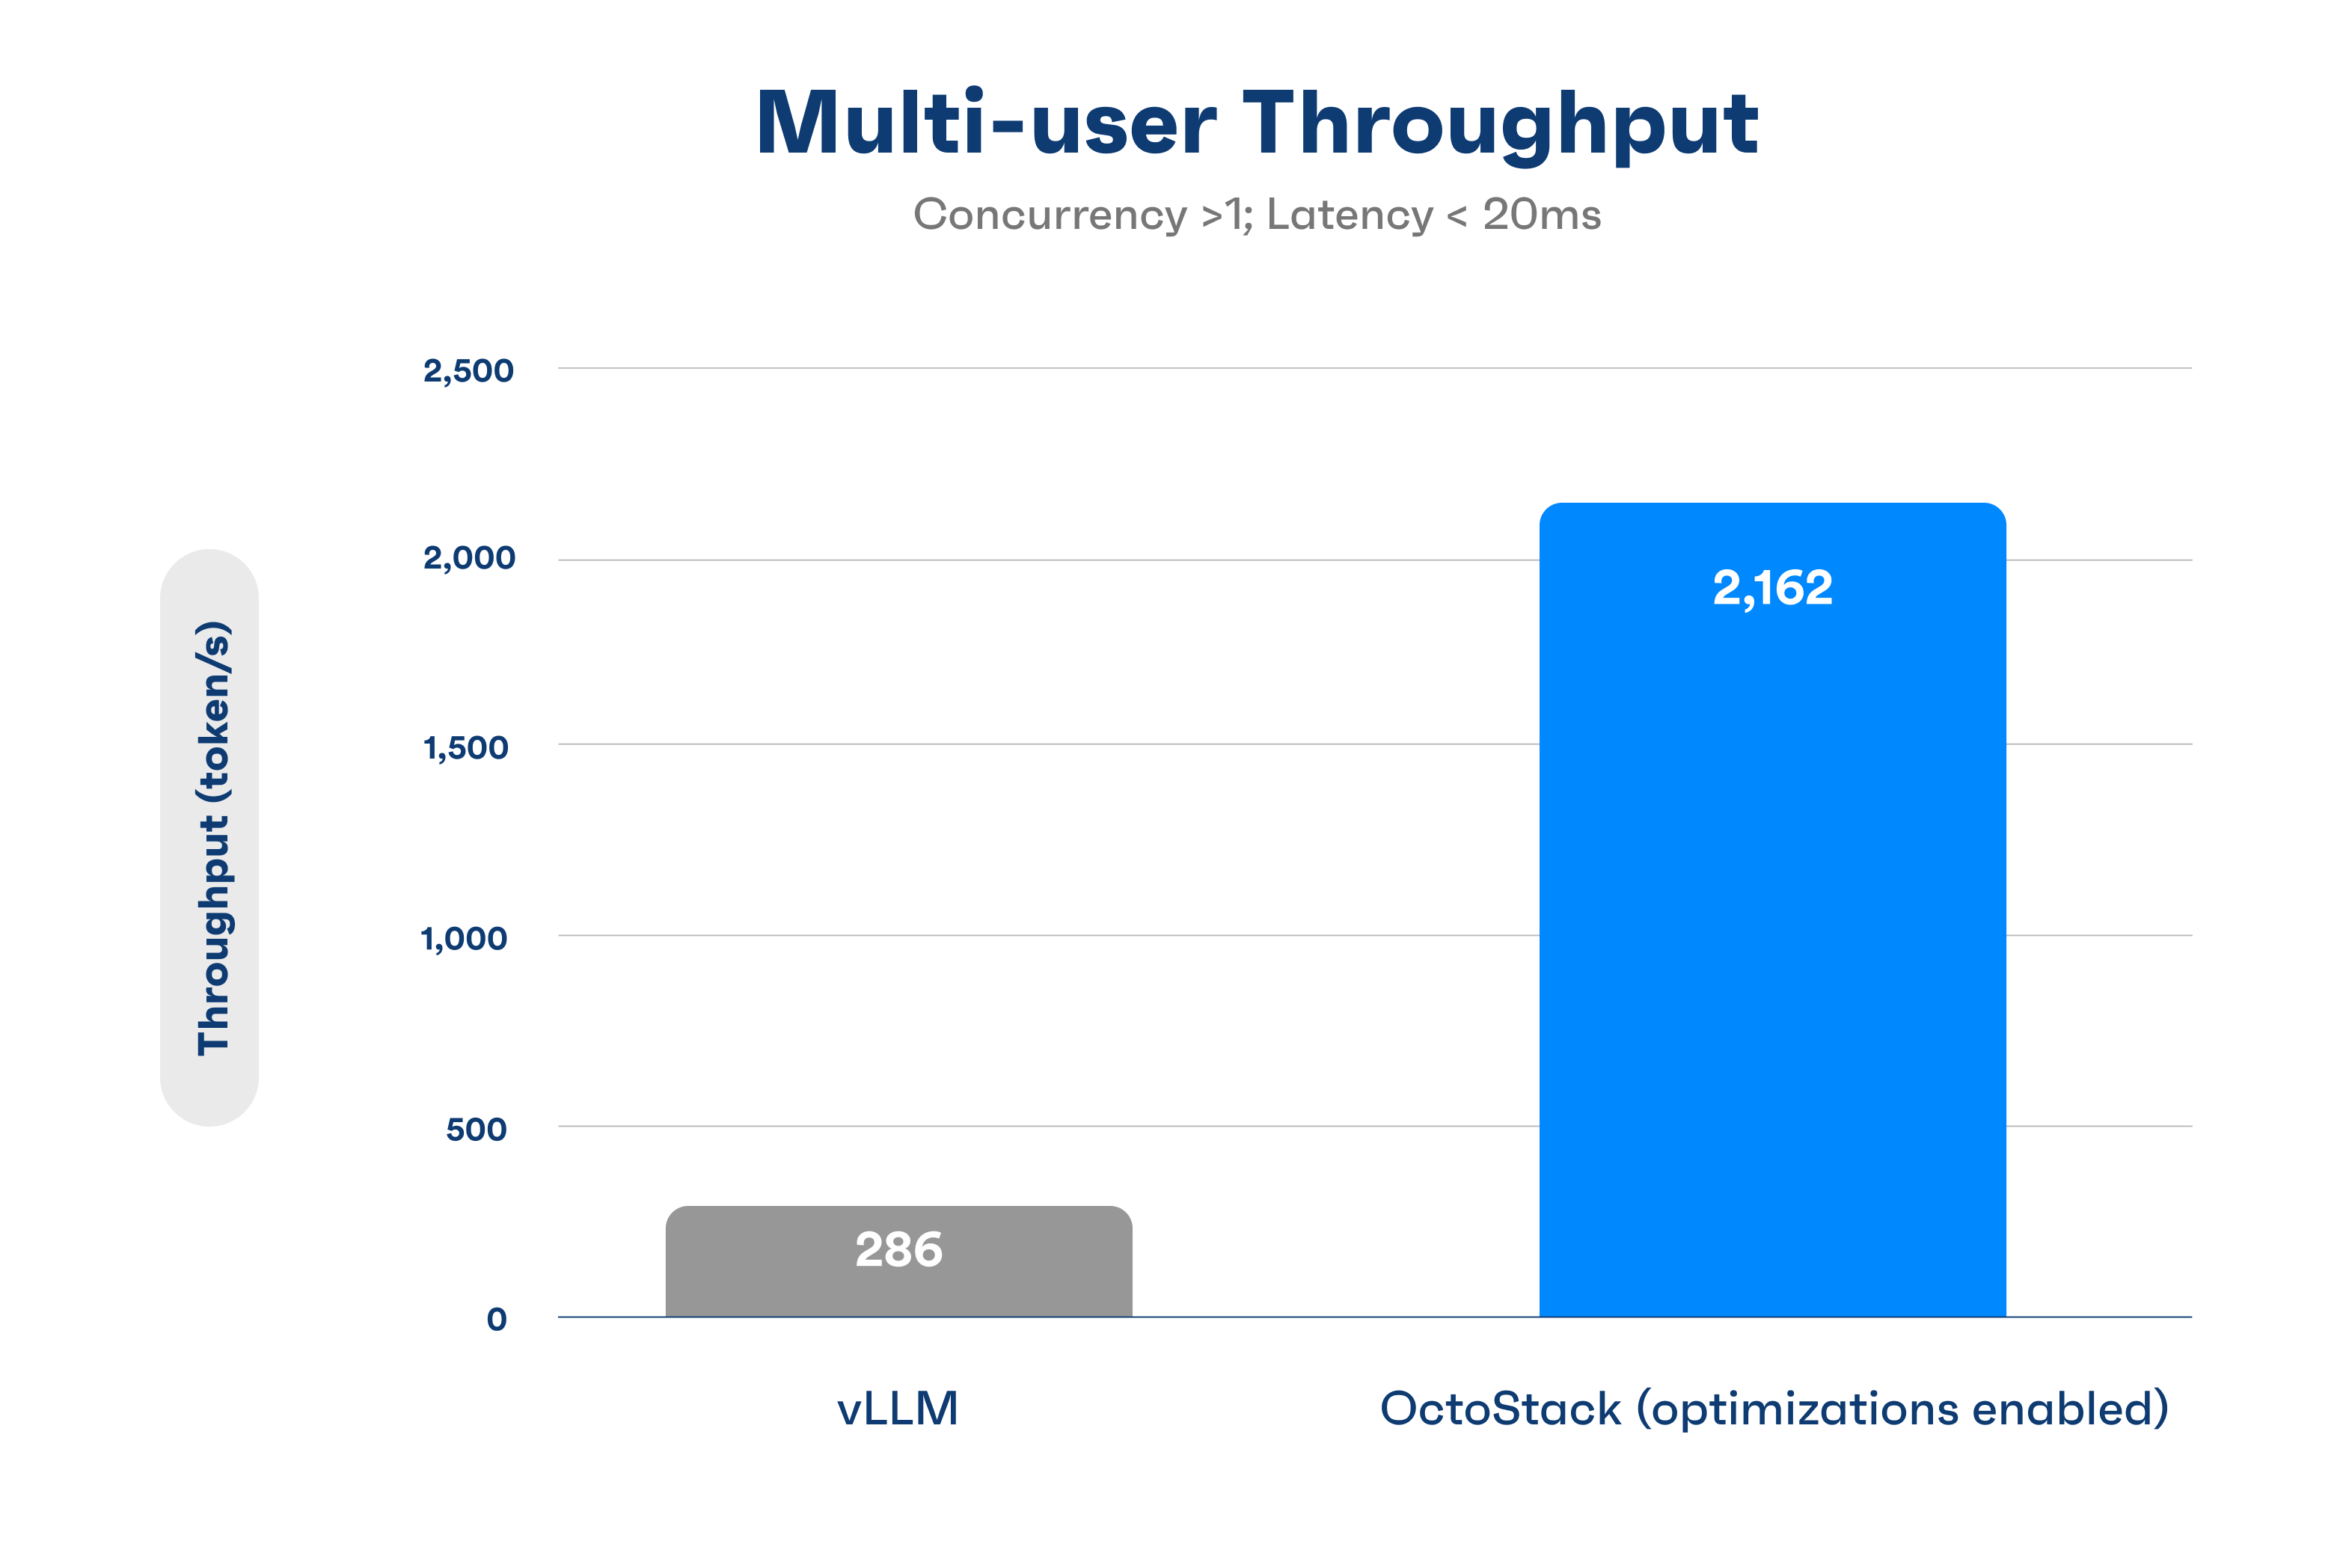 Multi-user Throughput of vLLM compared to OctoStack chart || '